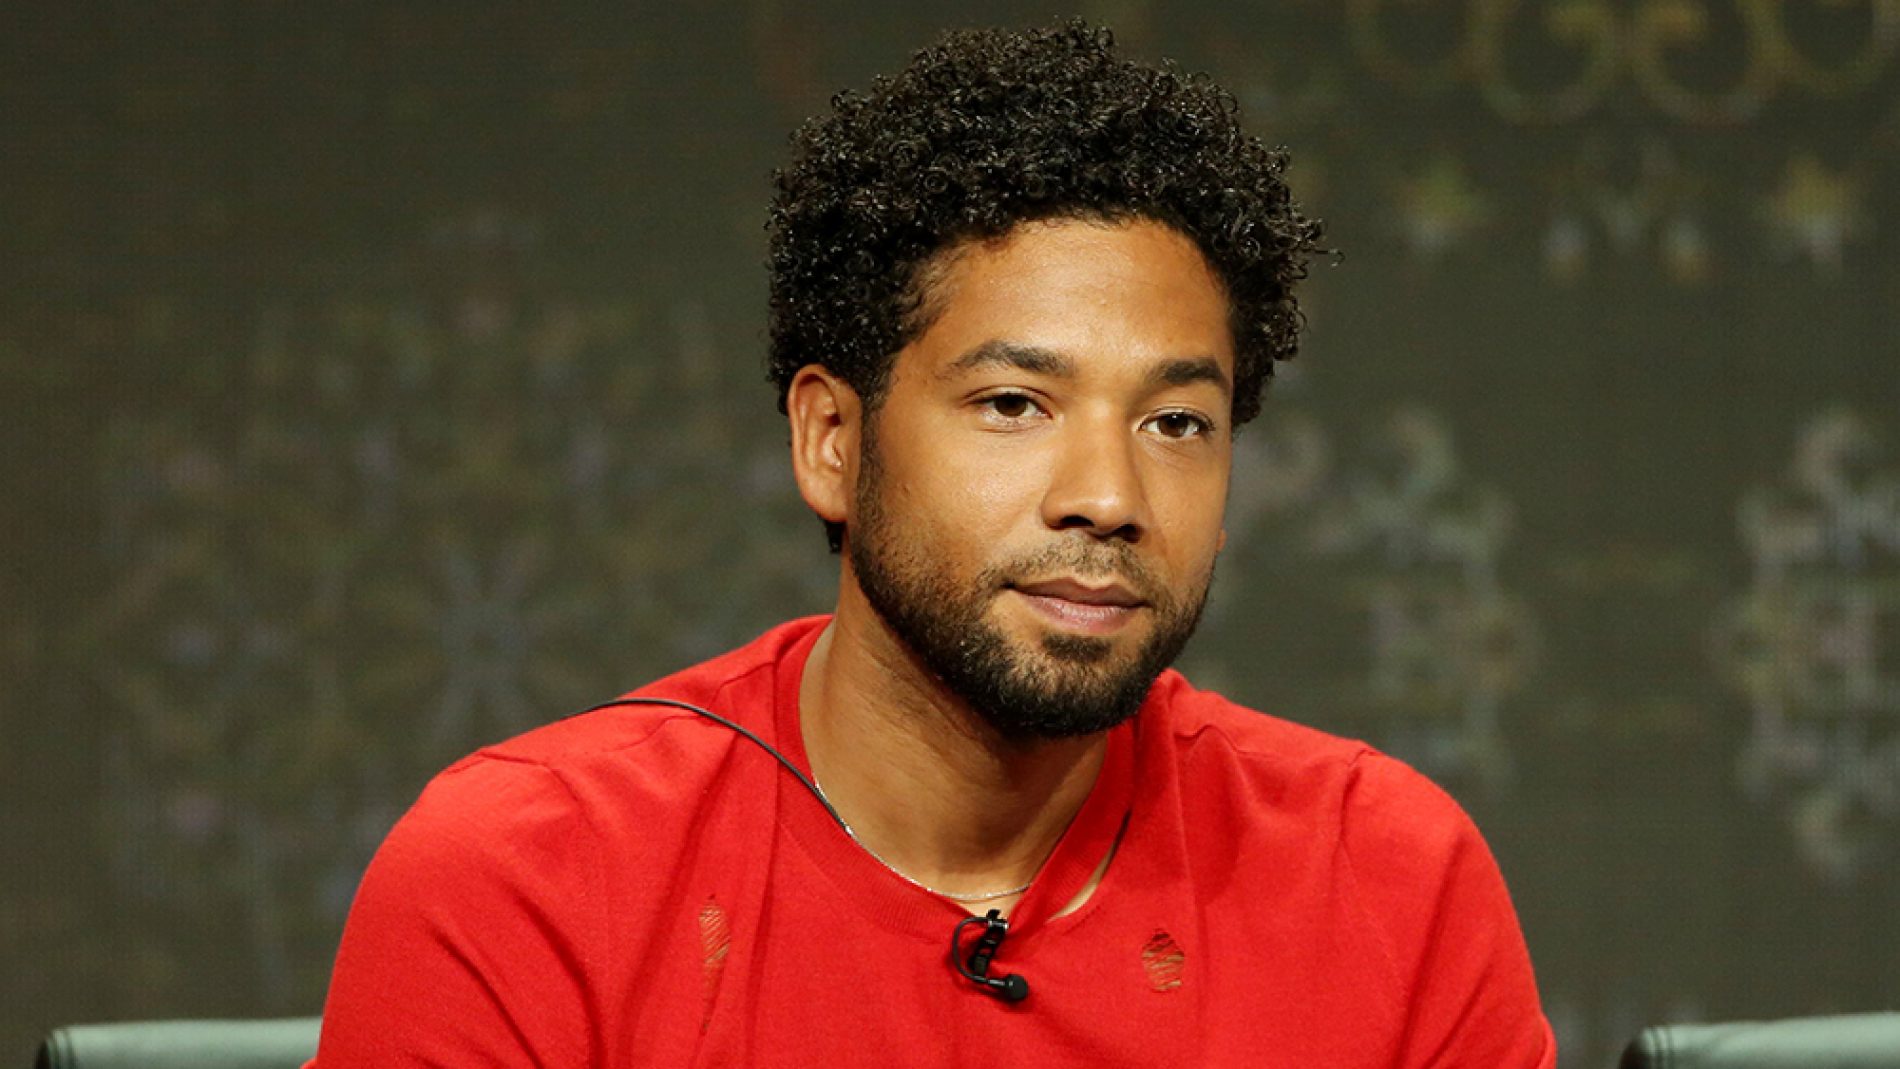 “My Body Is Strong But My Soul Is Stronger.” Jussie Smollett breaks silence following vicious attack